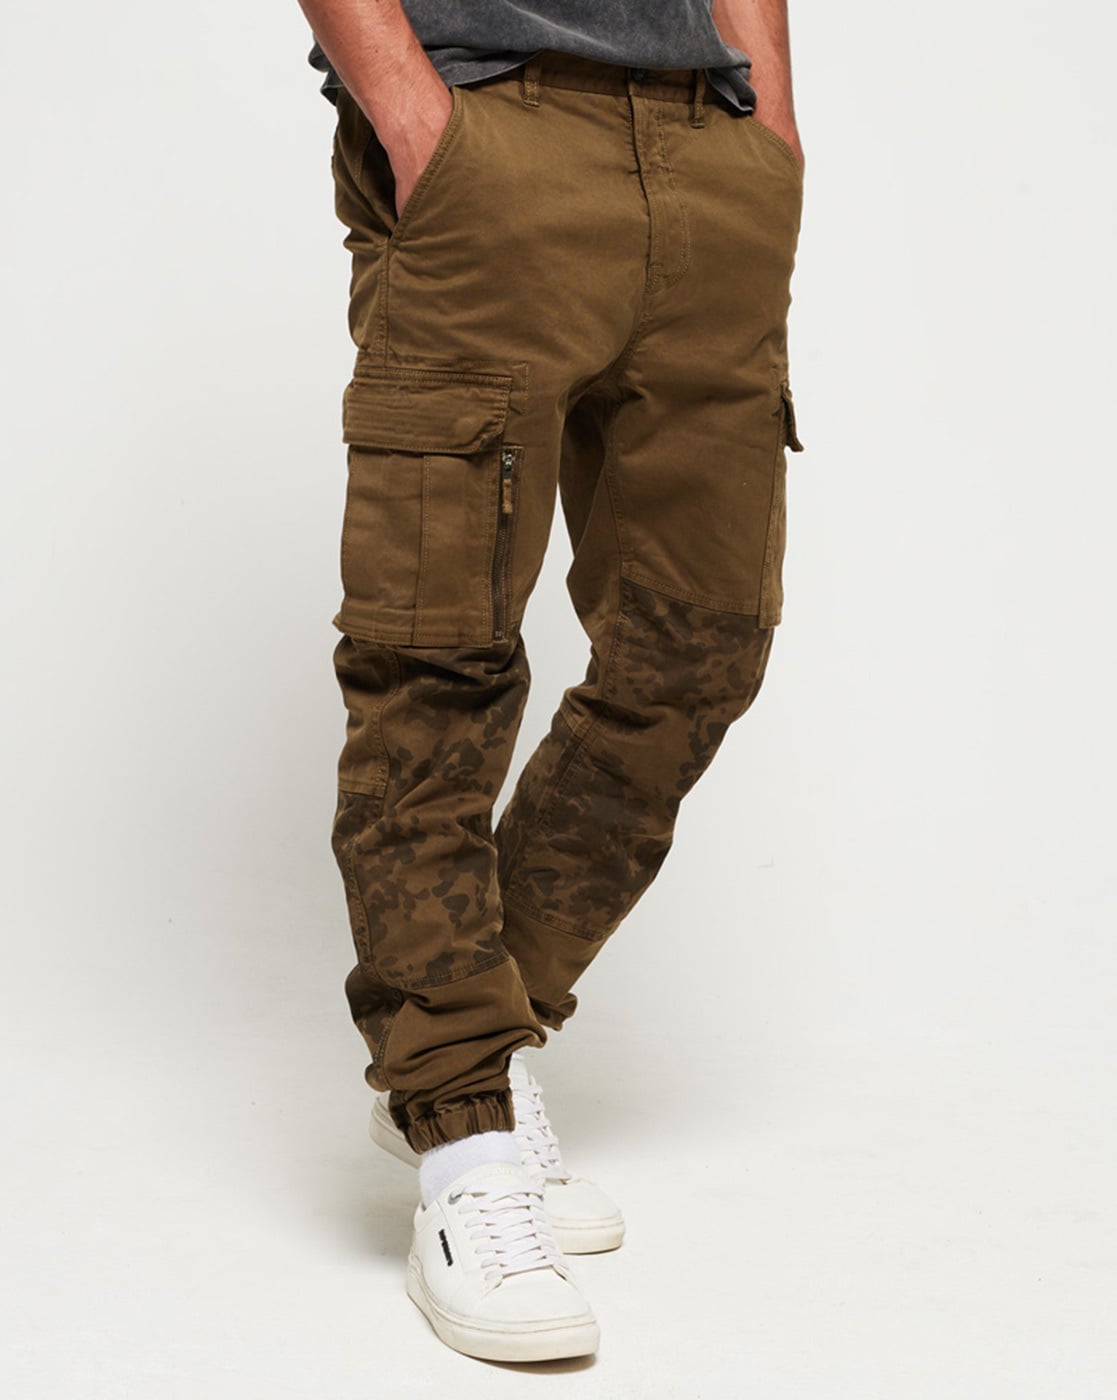 Buy RS Taichi Quick Dry Cargo Riding Pants  Rs11500